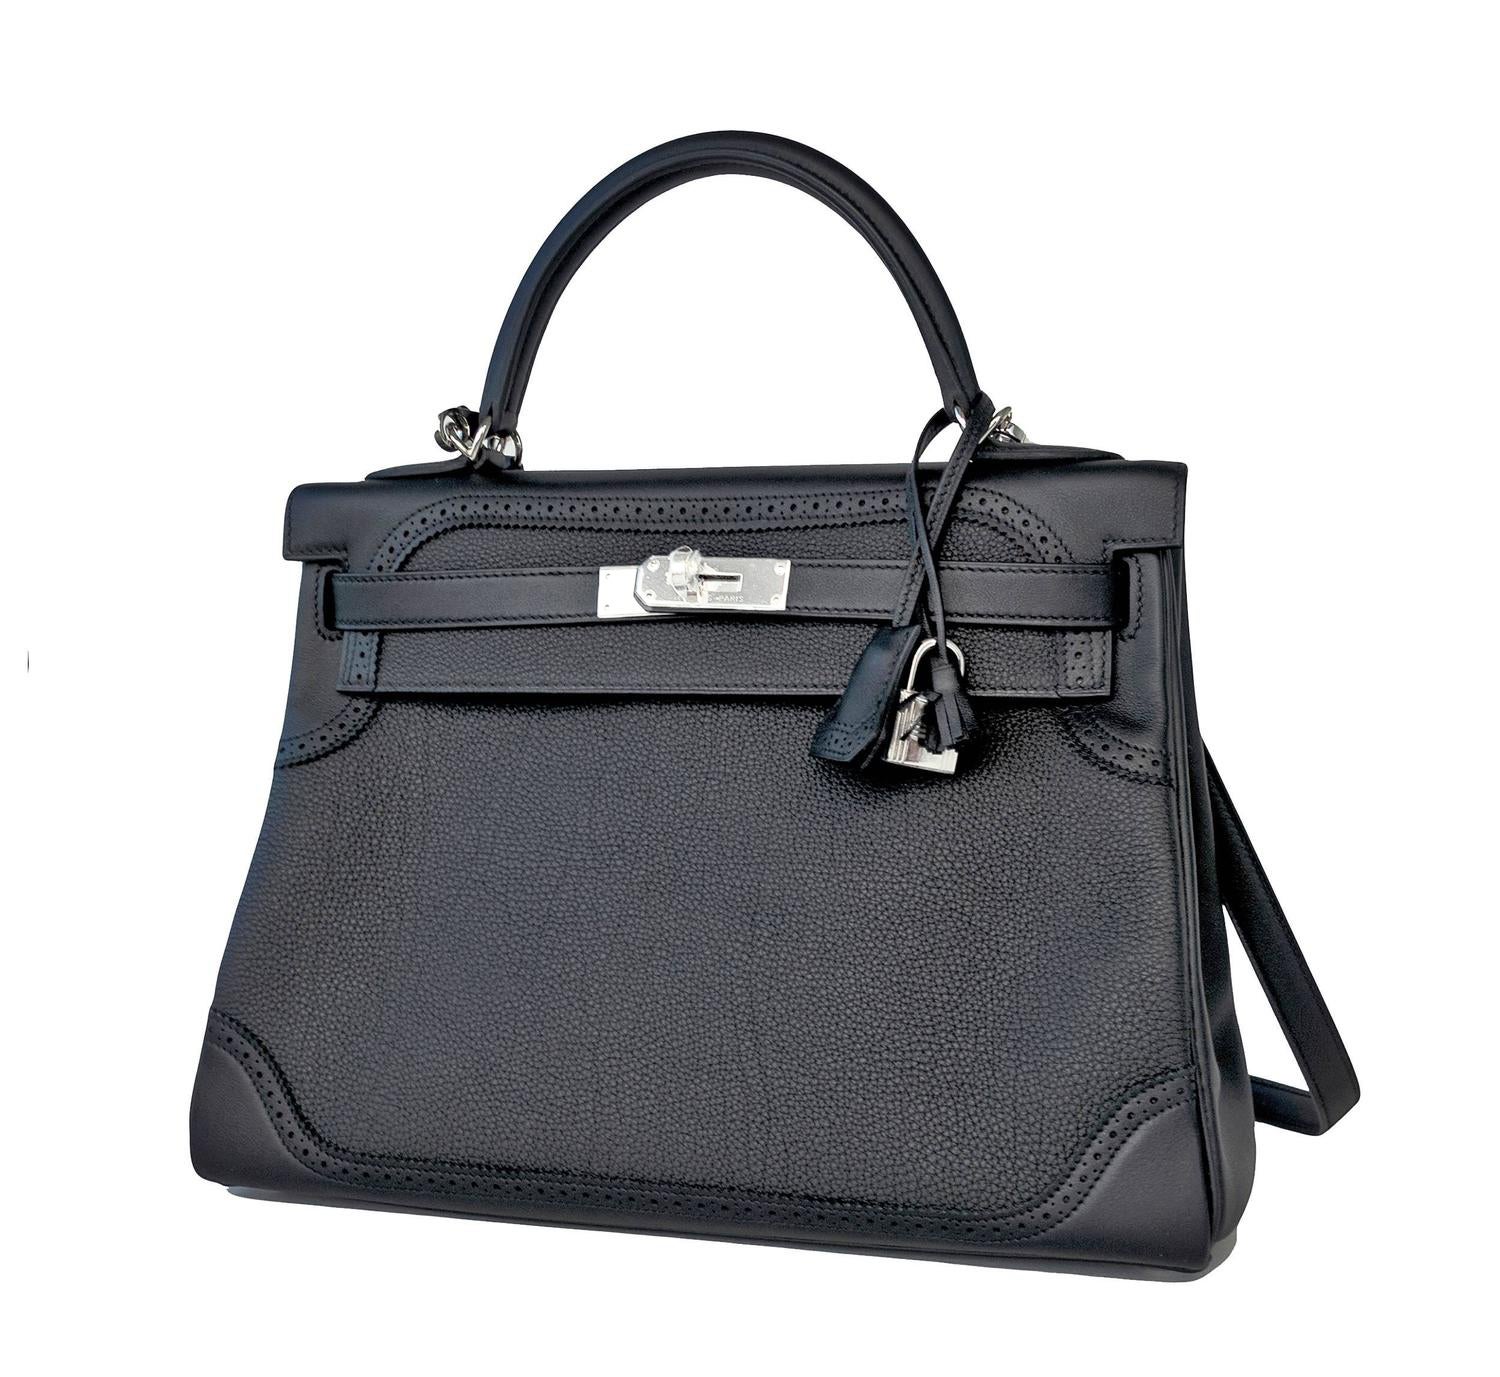 Hermes Black Ghillies Limited Edition 